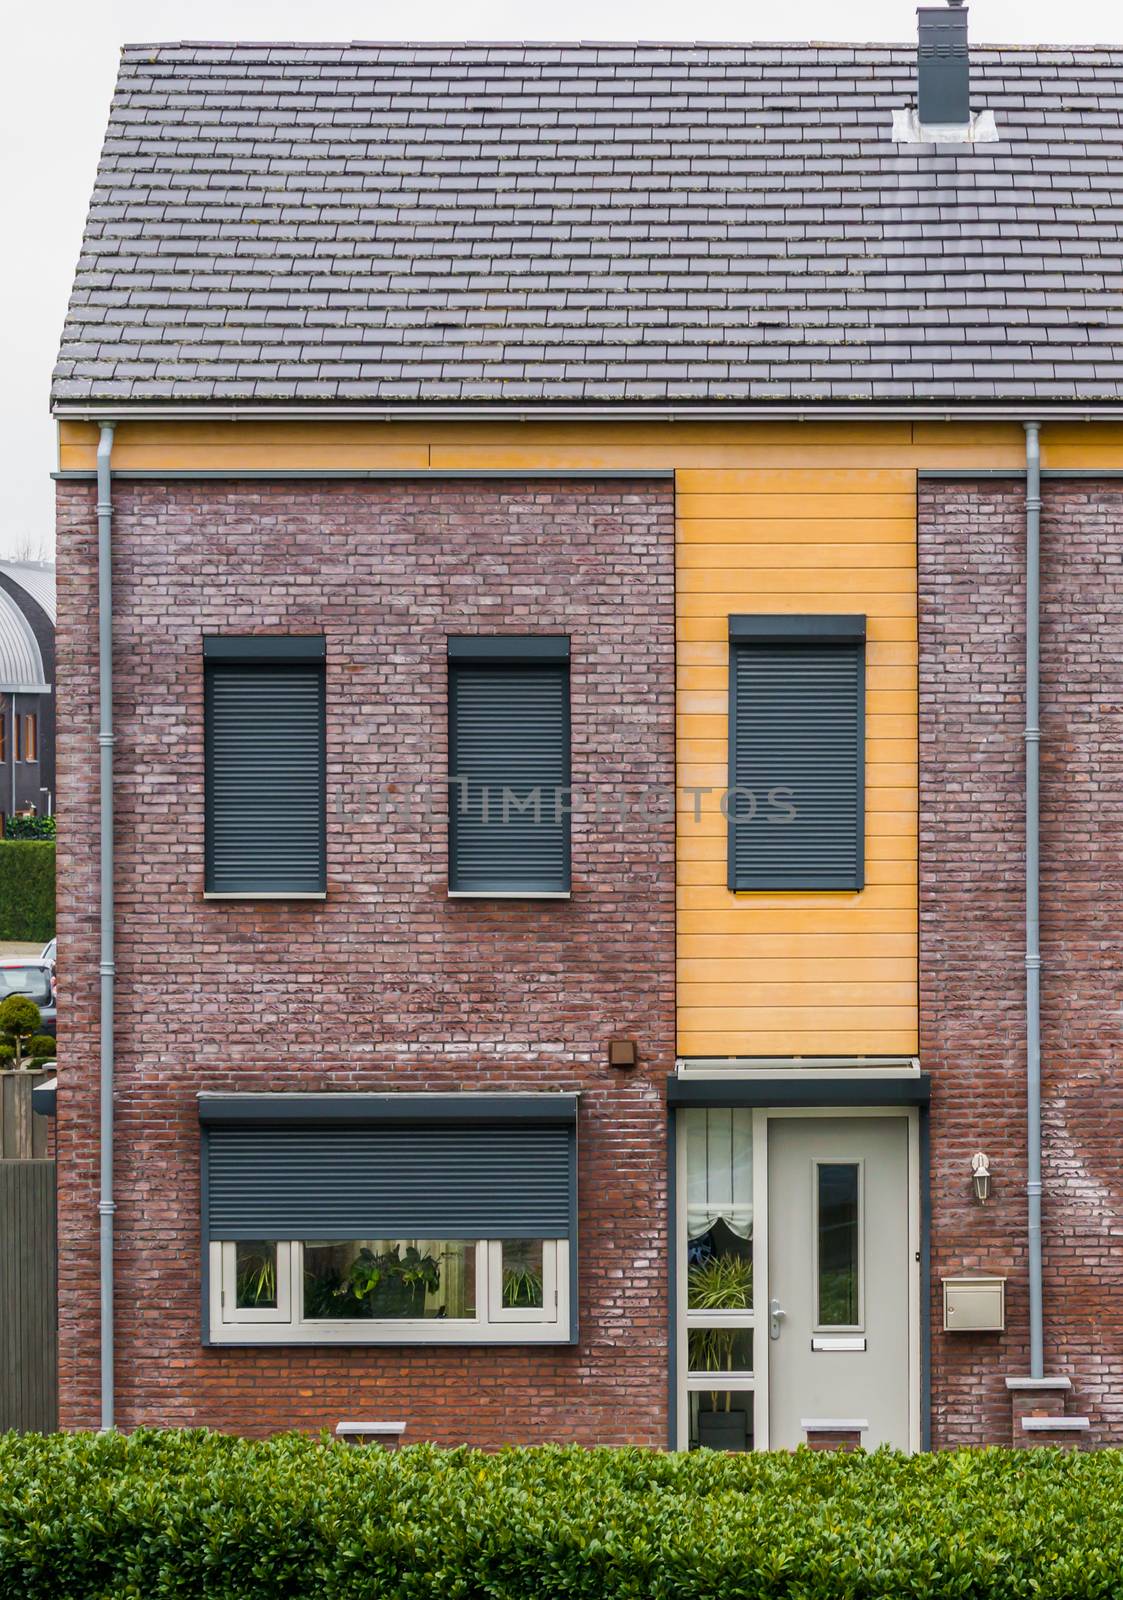 modern dutch terrace house decorated with plants behind the windows, some windows closed down with roller shutters, home in a dutch small village